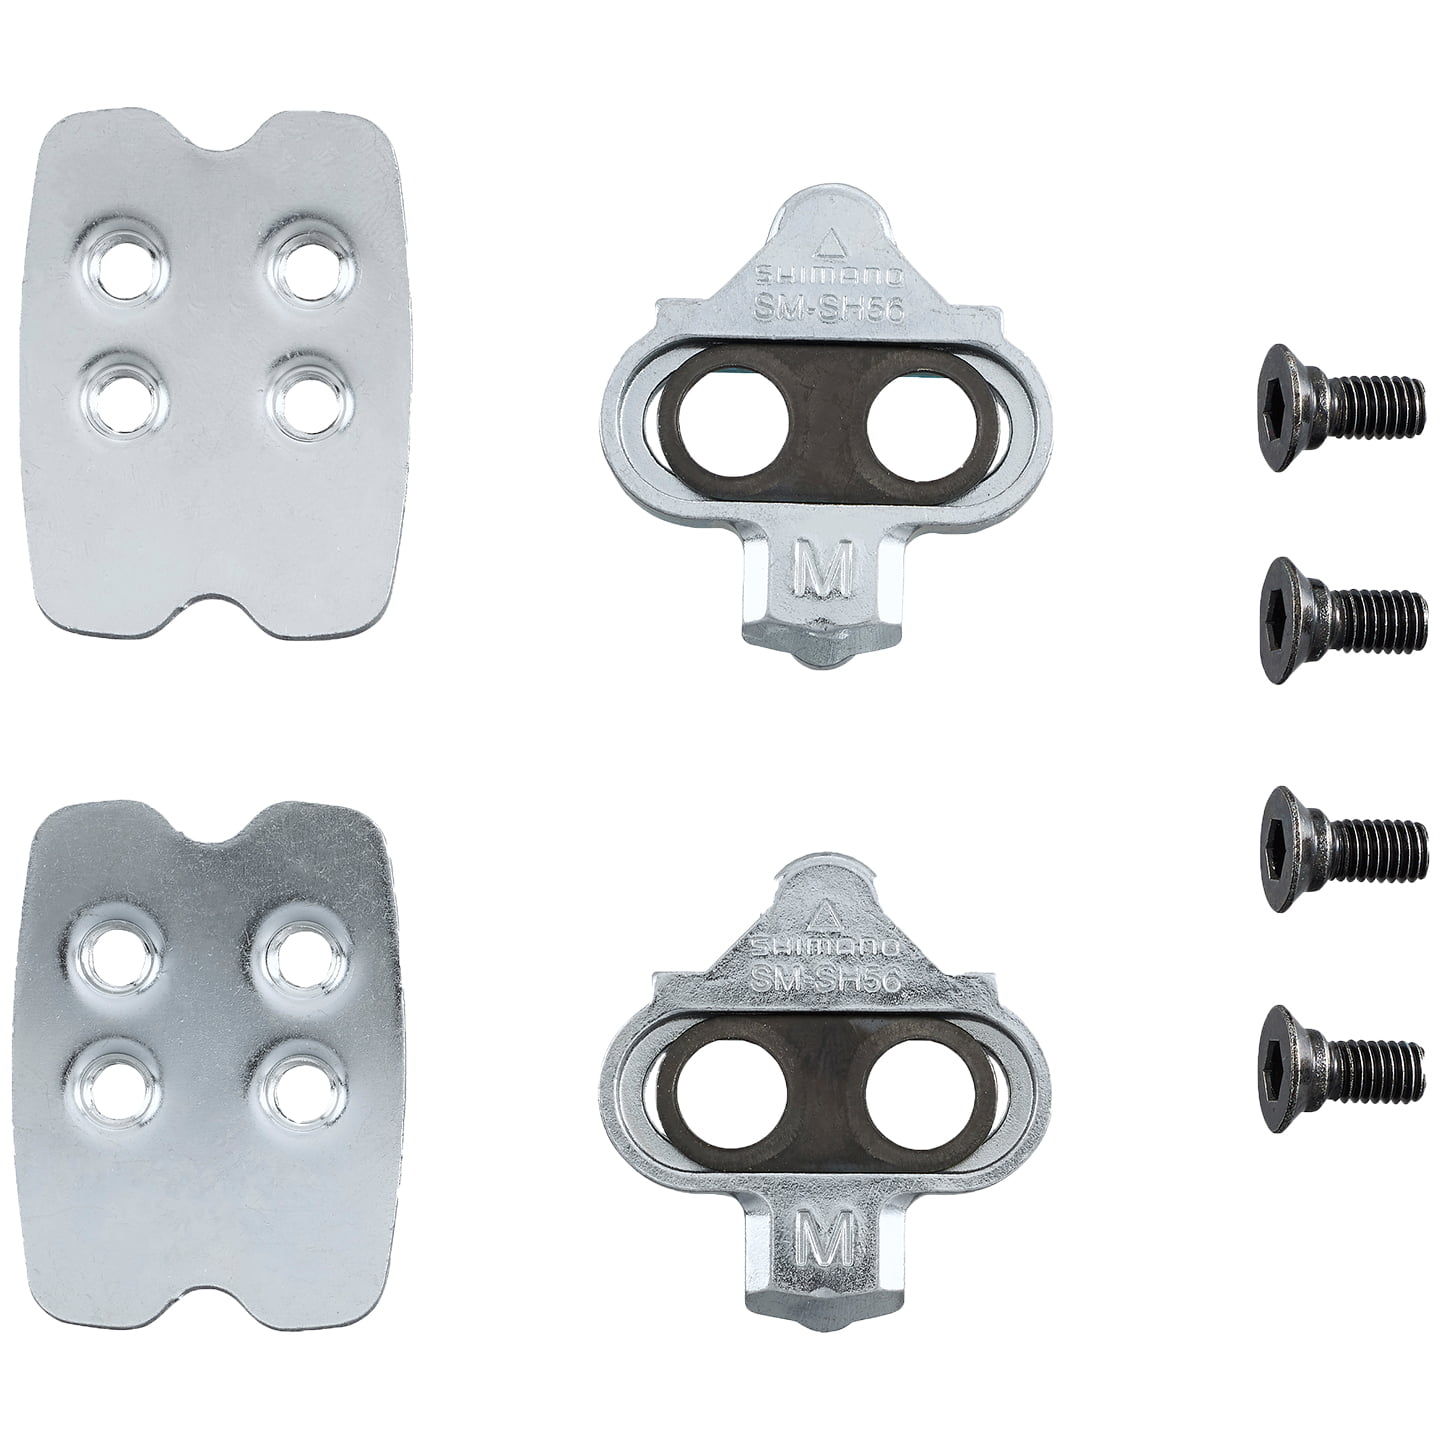 SHIMANO SM-SH56 SPD Cleats with counter-plate Pedal Cleats for MTB, Bike pedal, Bike accessories